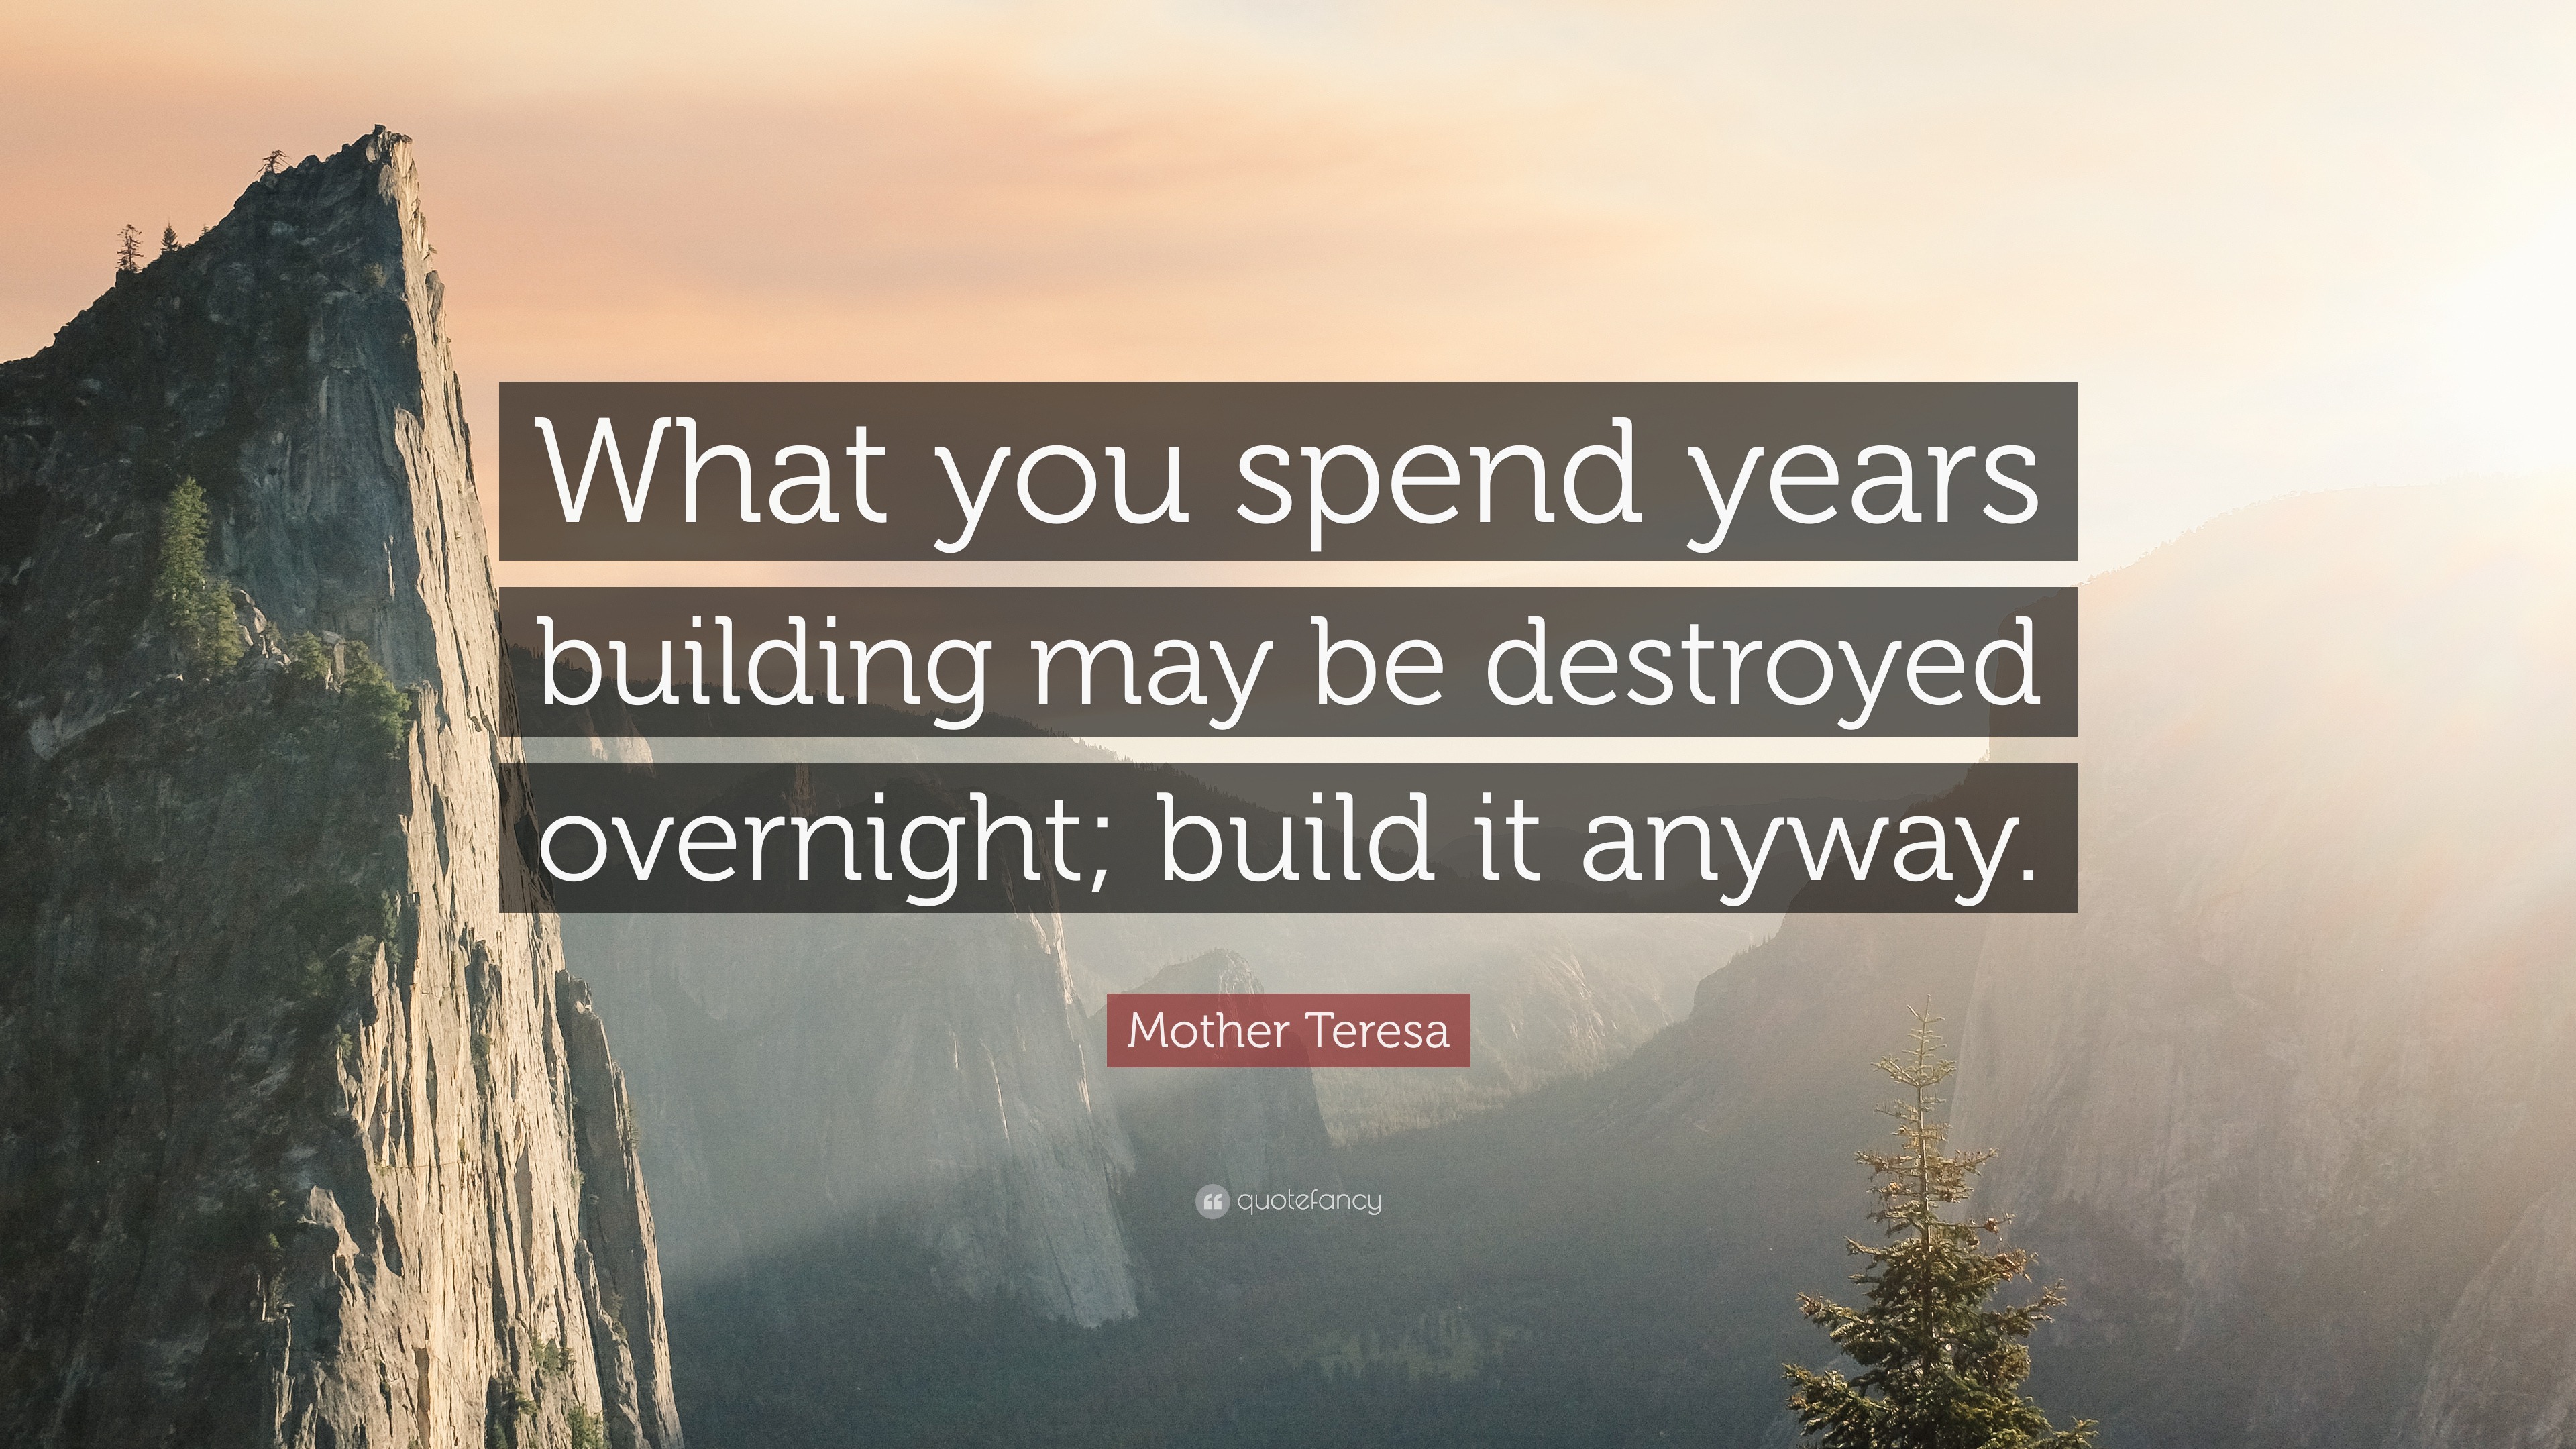 Mother Teresa Quote: “What you spend years building may be destroyed